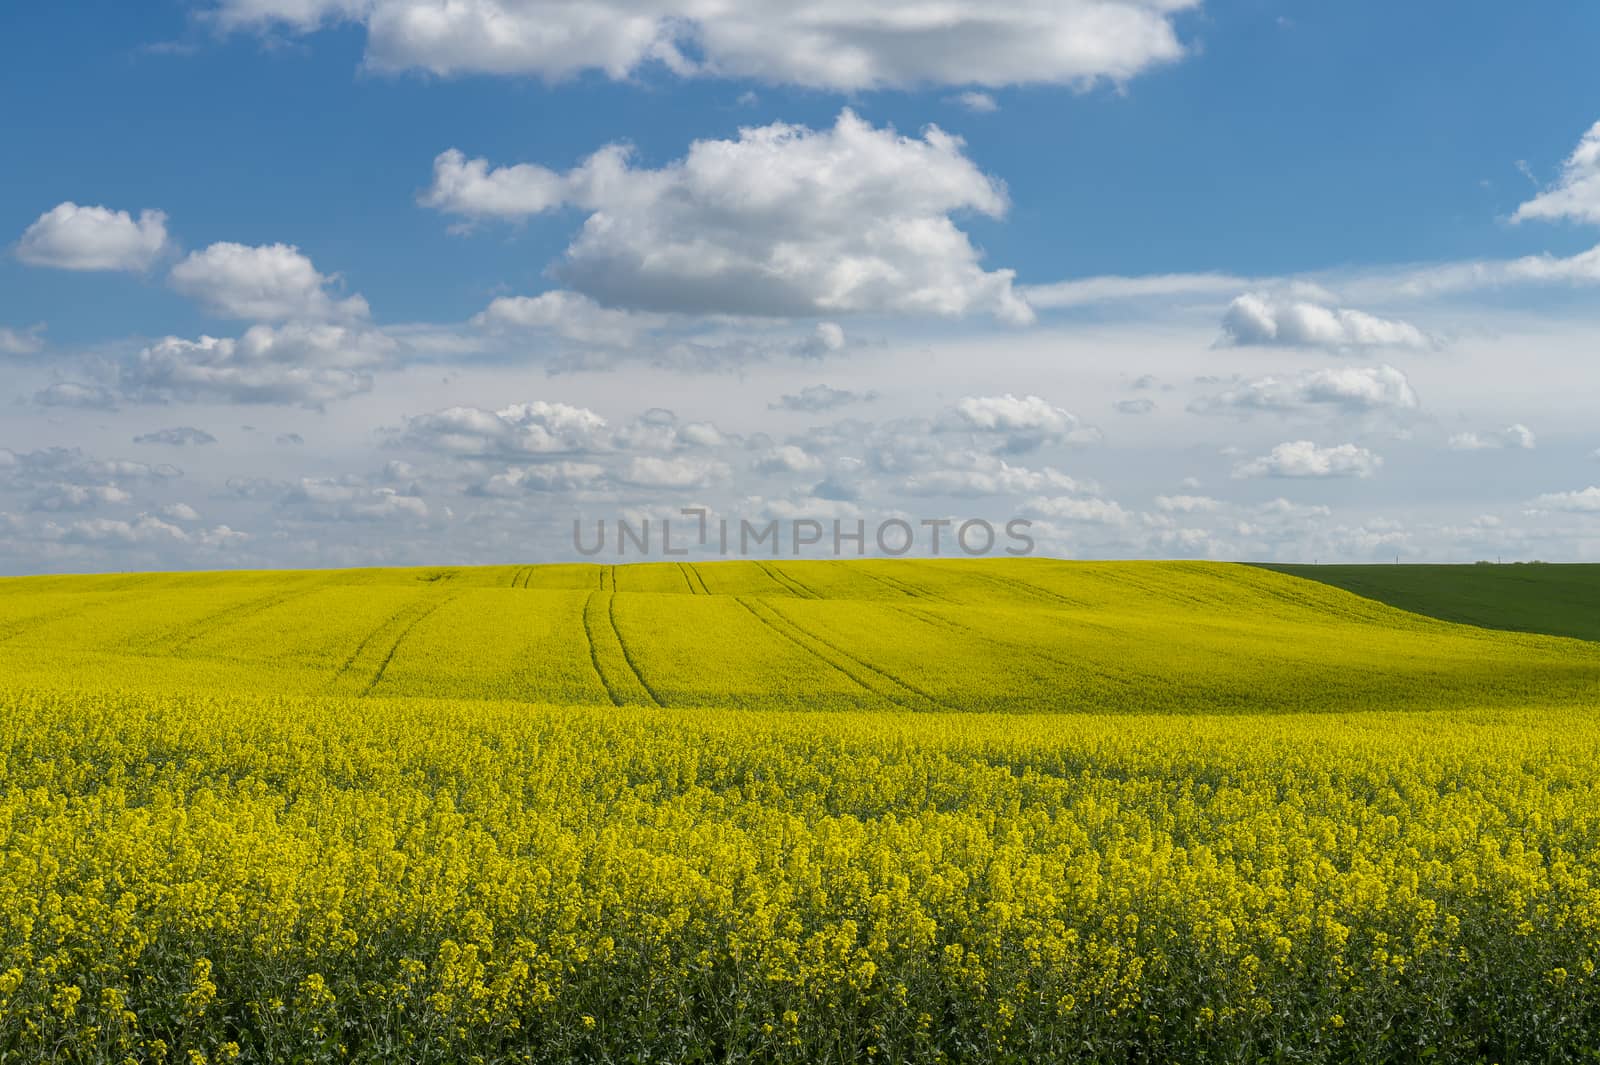 Flowering field of bright yellow rapeseed, canola or colza under a sunny blue sky and clouds